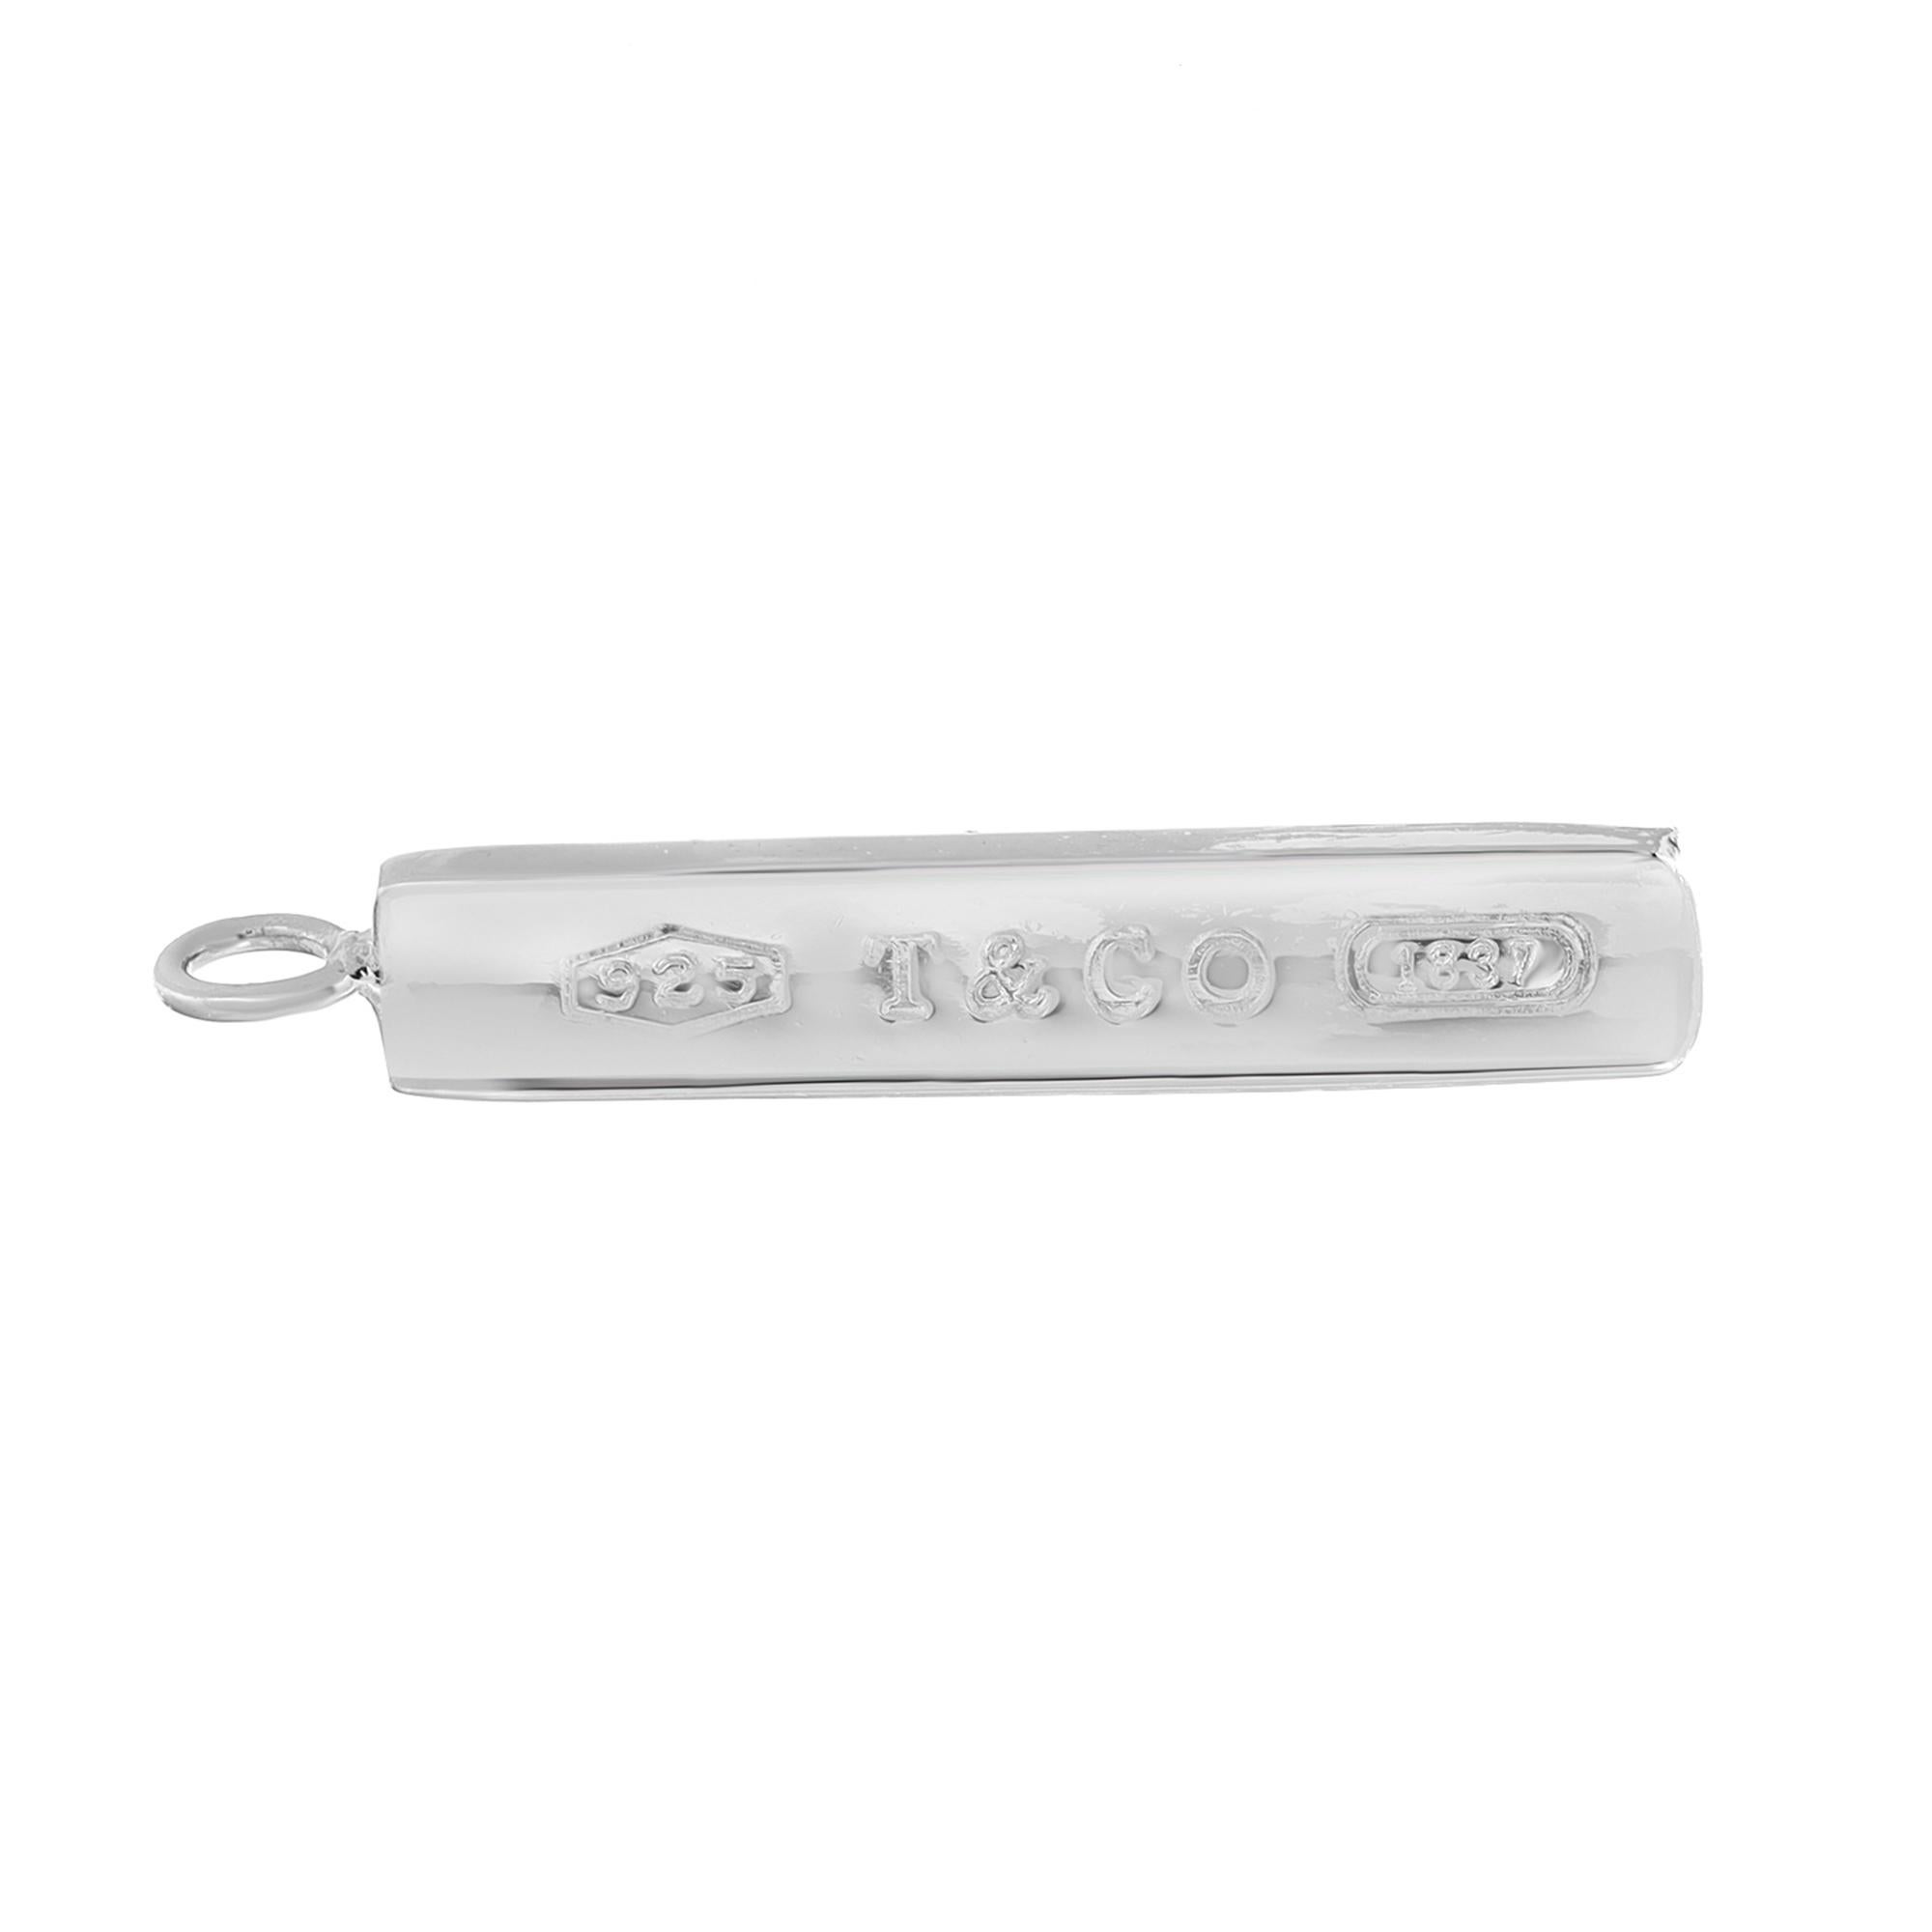 Simple and bold, Tiffany & Co. 1837 long bar pendant designed in highly polished 925 sterling silver. This pendant comes with engraving and is stamped on the front and back. Pendant length: 1.8 Inches. Width: 8mm. Total weight: 6.38 grams. No chain